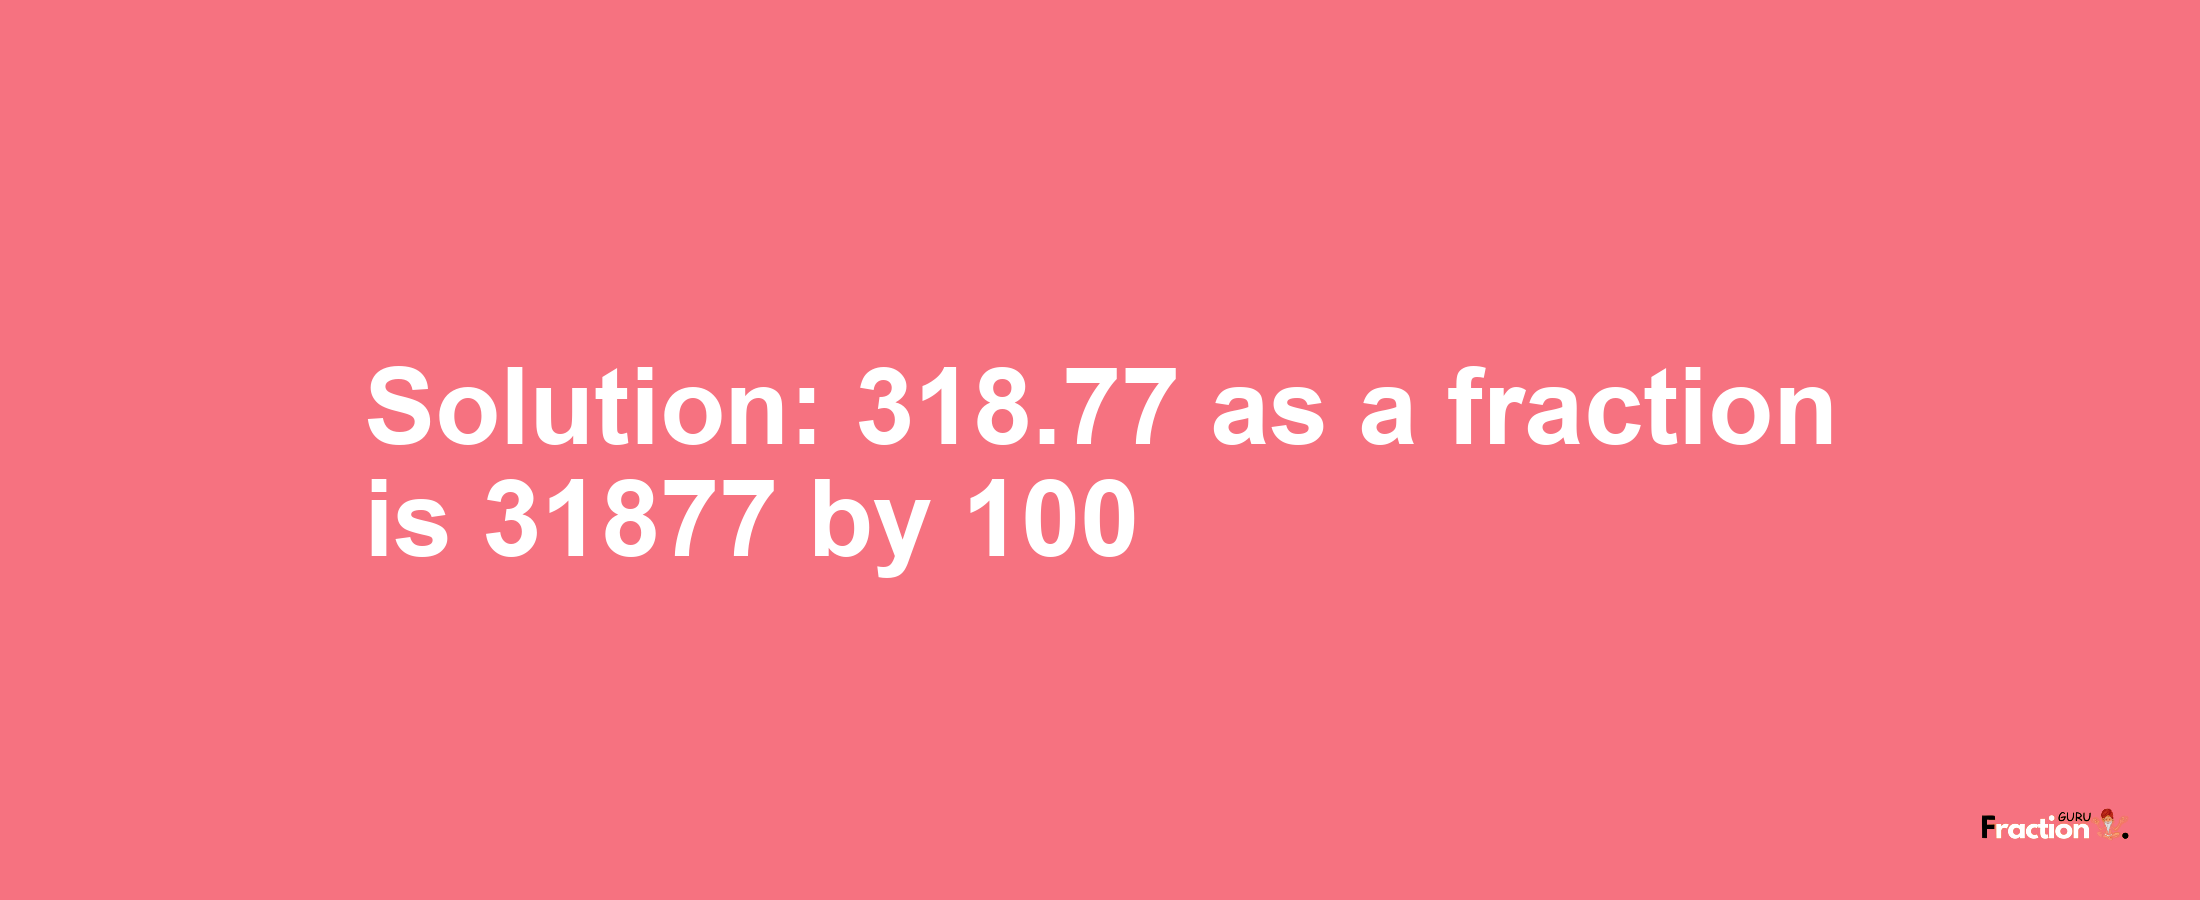 Solution:318.77 as a fraction is 31877/100